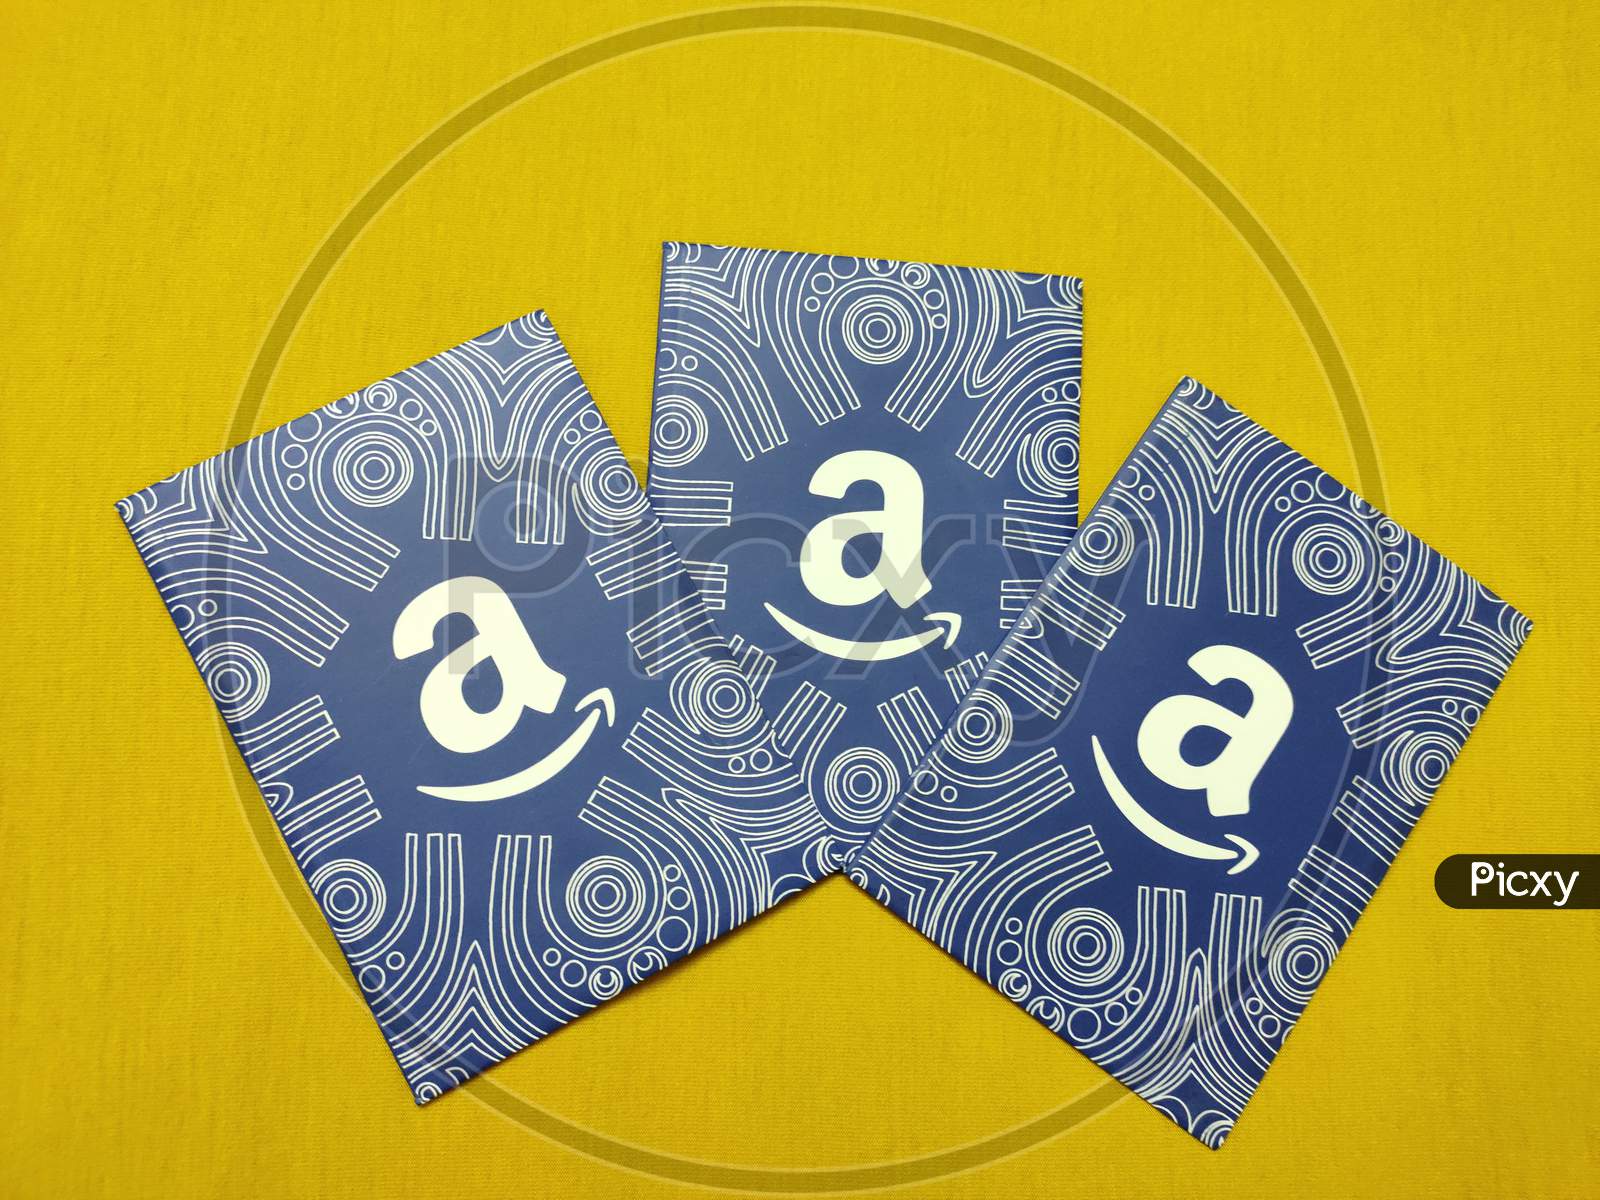 Noida, UP / India - Aug 31, 2019: Amazon gift cards isolated on yellow background with space for text, which allows the recipient to purchase items from the Amazon.com website